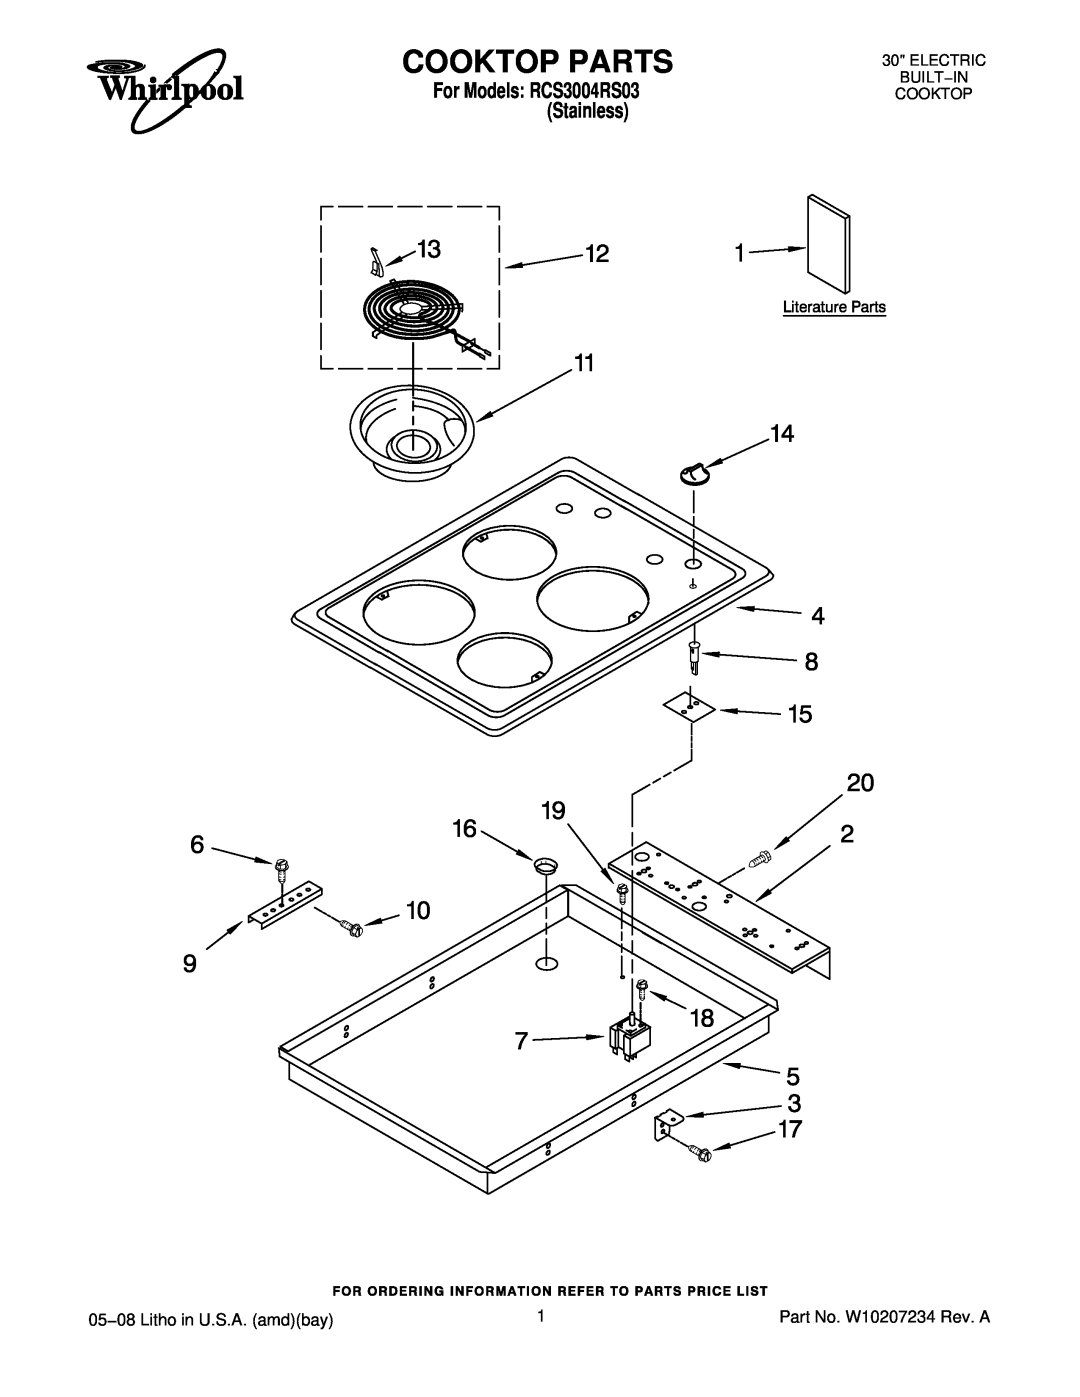 Whirlpool manual Cooktop Parts, 05−08 Litho in U.S.A. amdbay, For Models RCS3004RS03 Stainless 